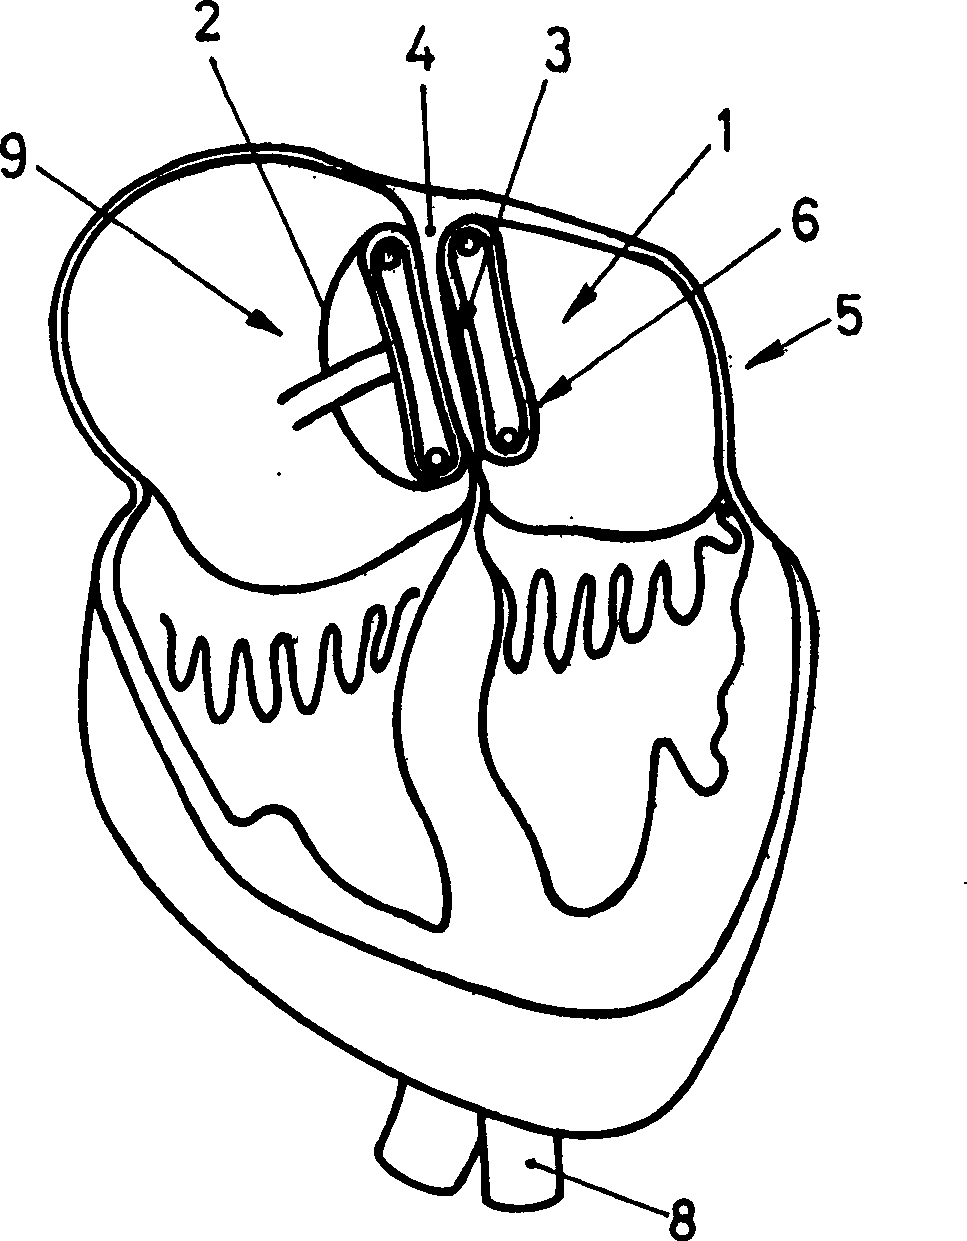 A device for plugging an opening such as in a wall of a hollow or tubular organ